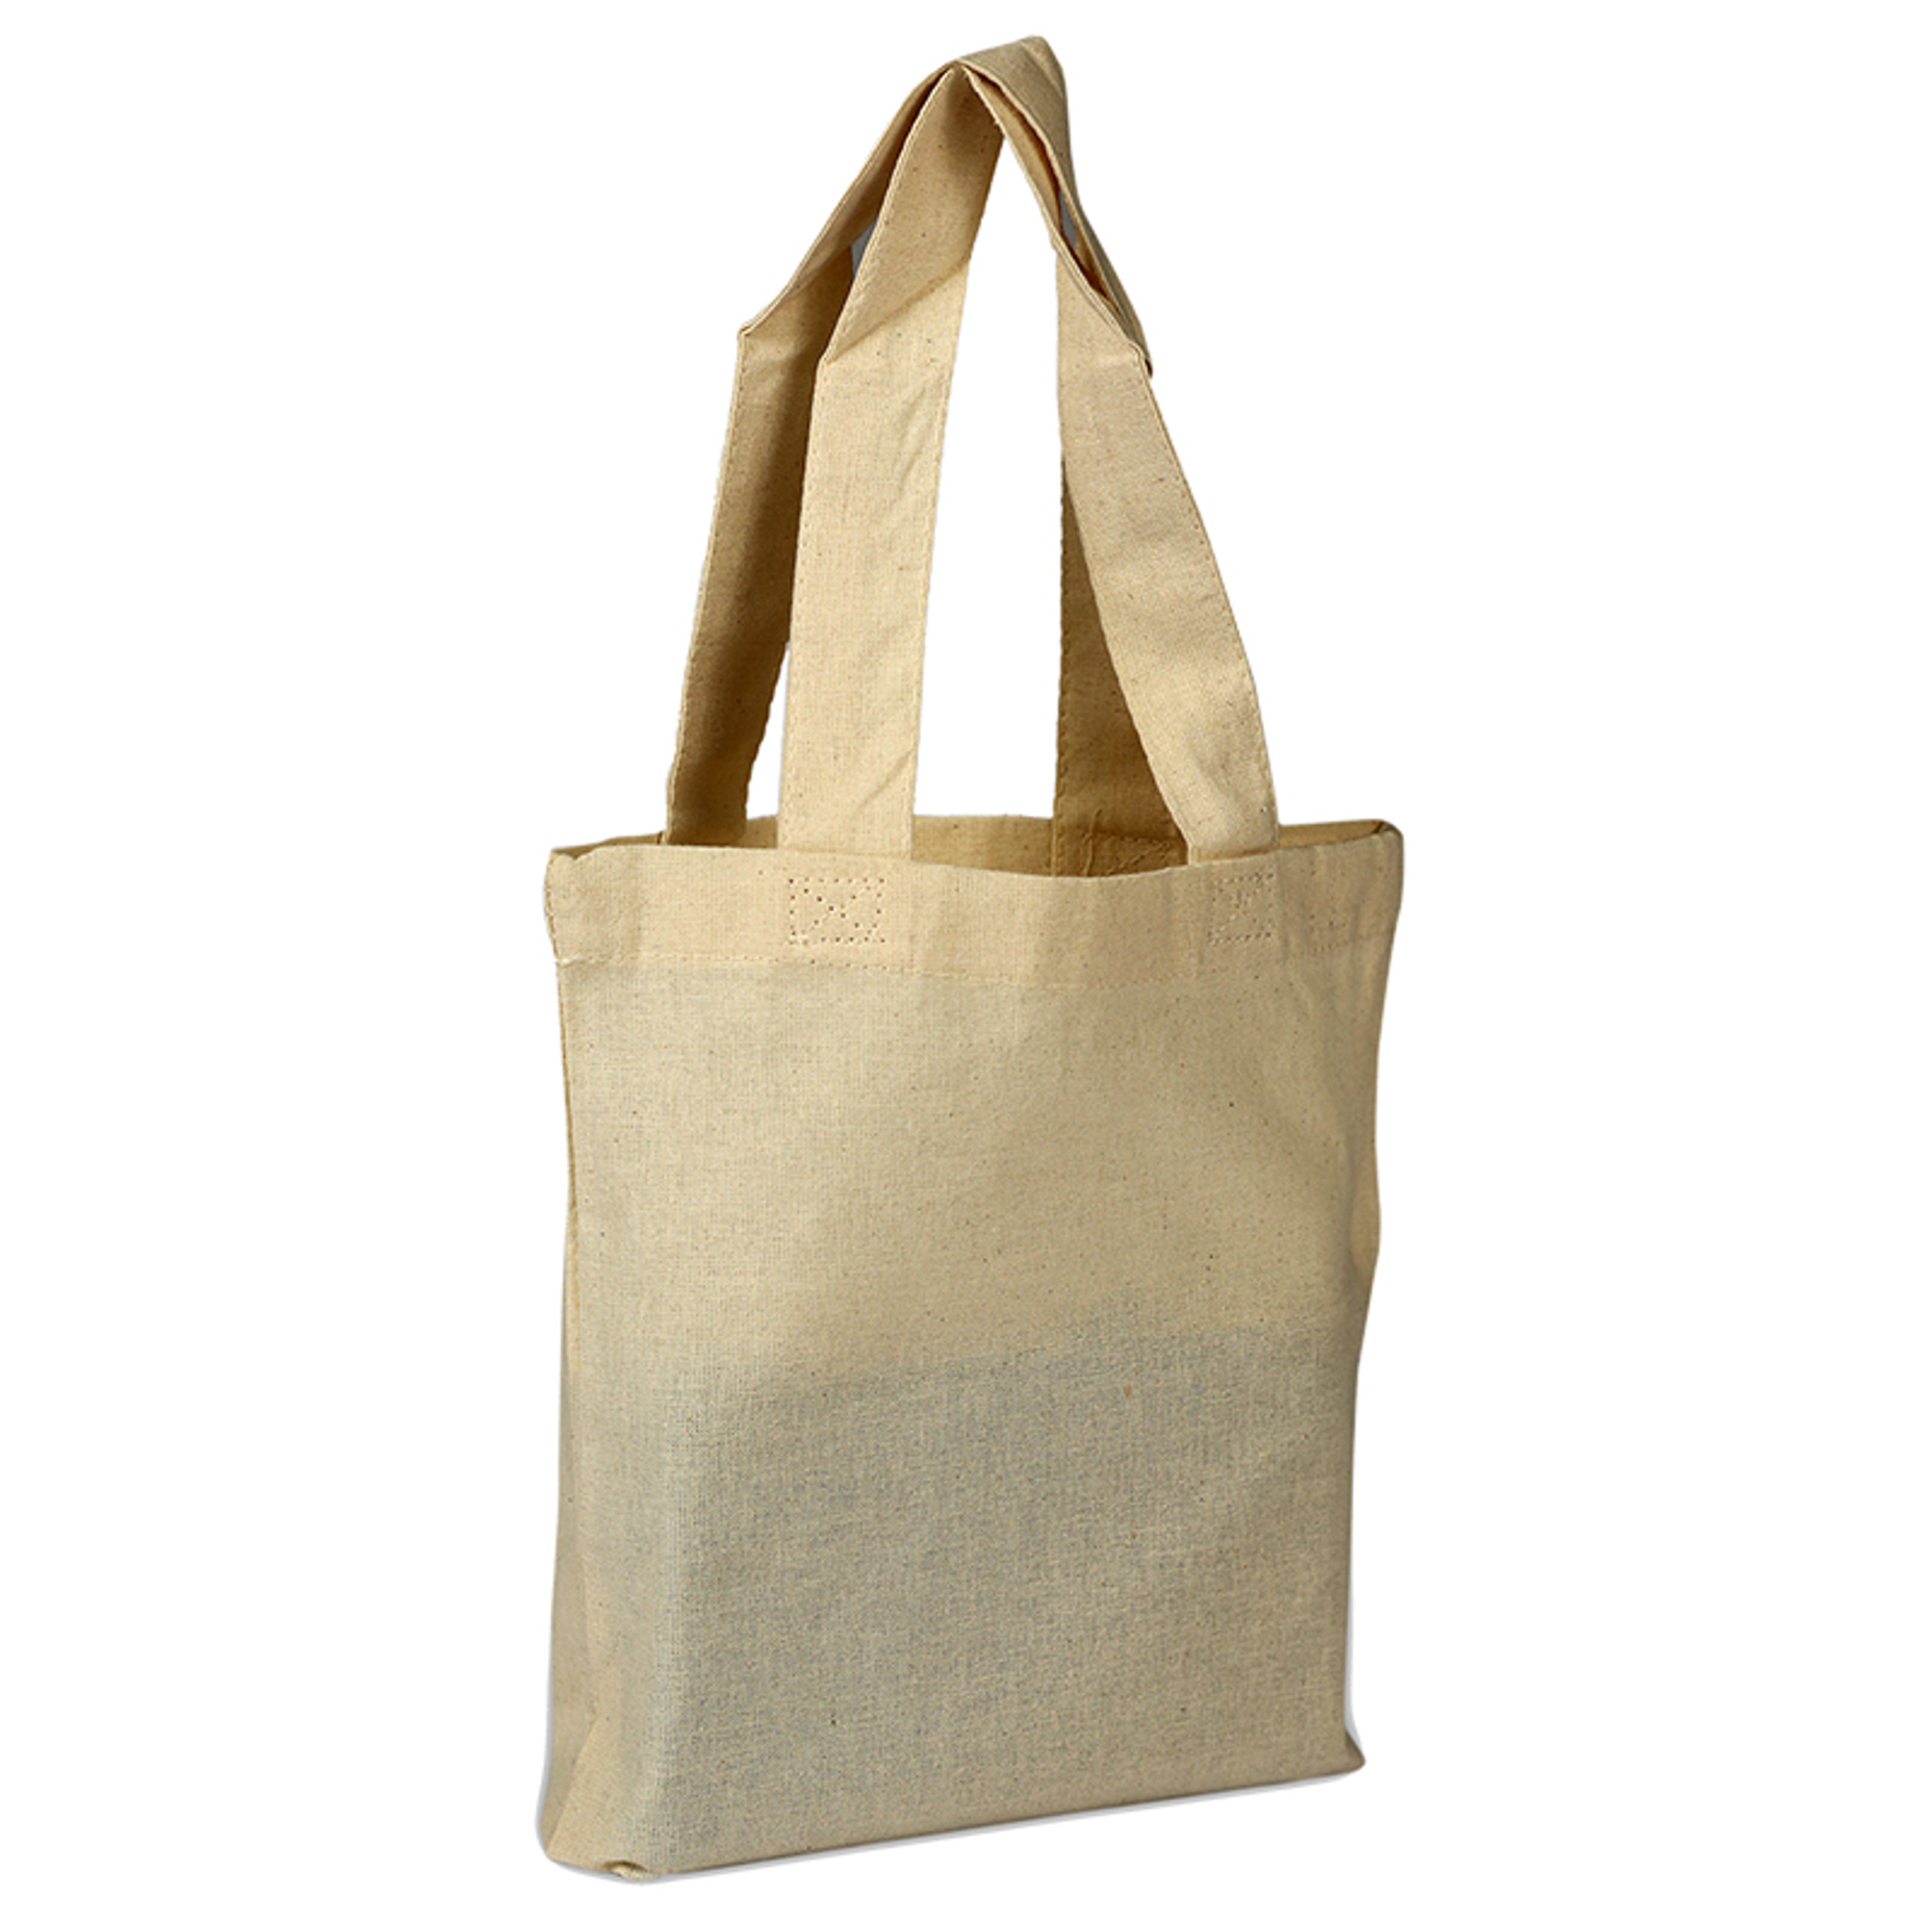 Wholesale Cotton Tote Bags with Bottom Gusset